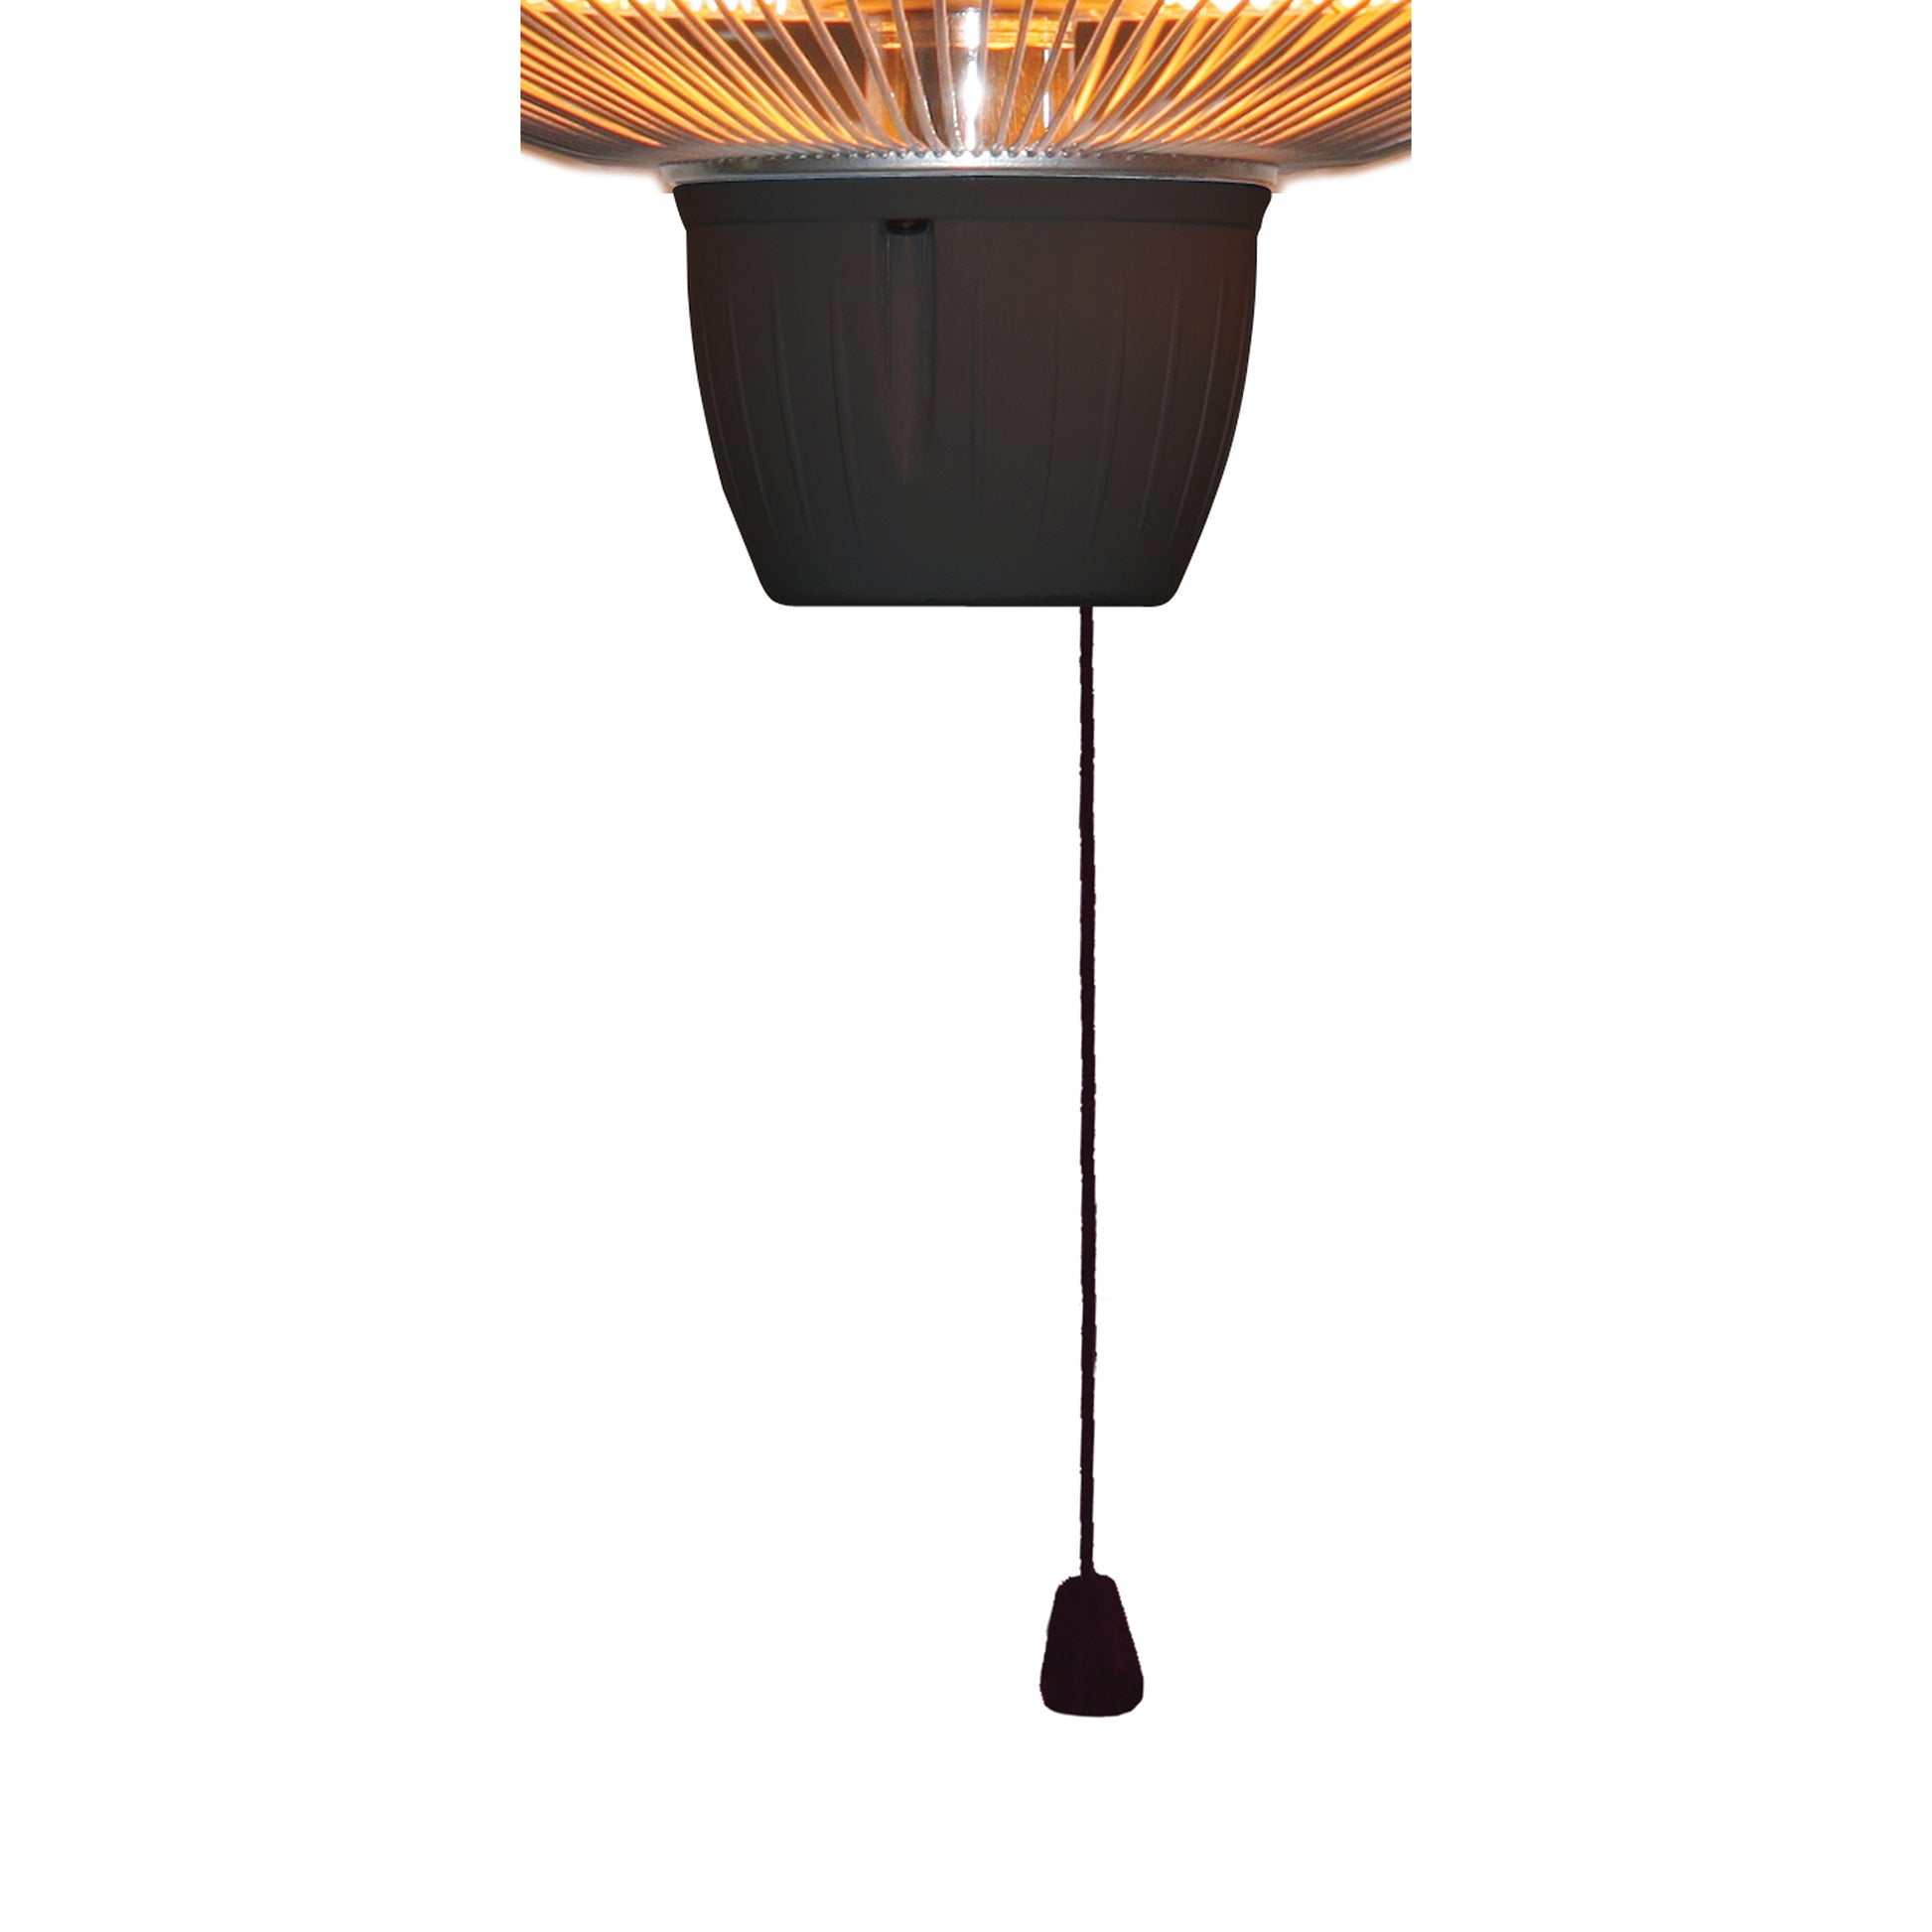 Westinghouse Infrared Electric Outdoor Heater - Hanging alt 0